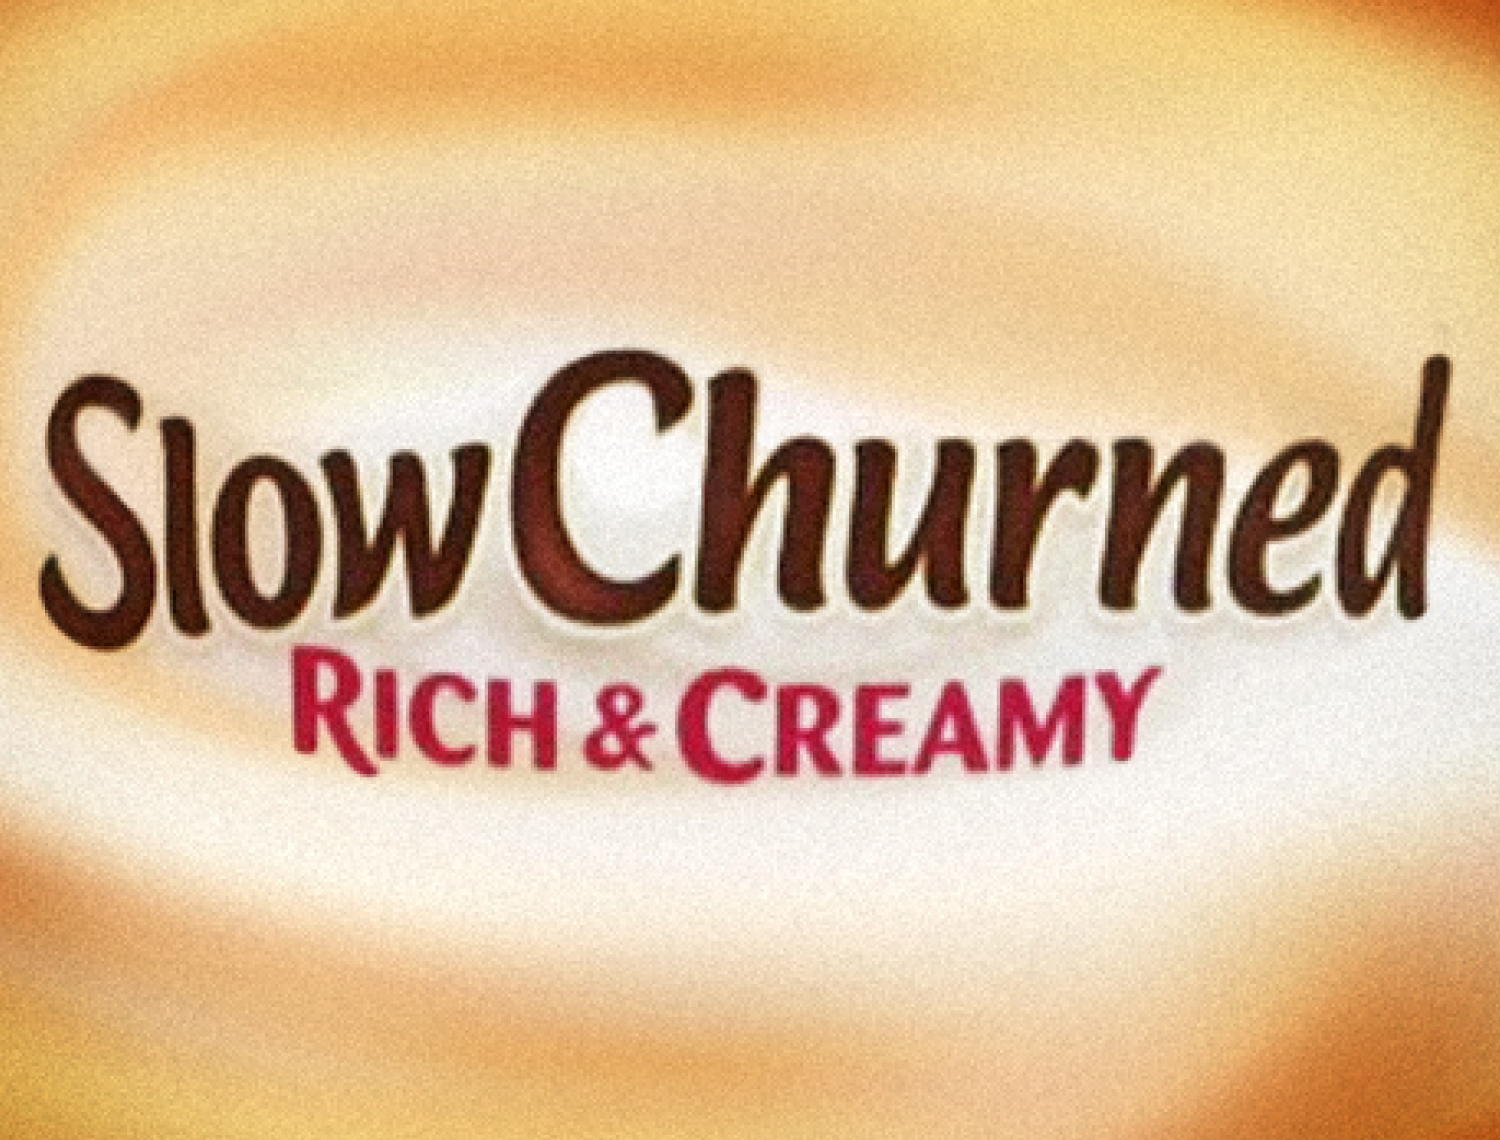 close up of slow churned rich & creamy